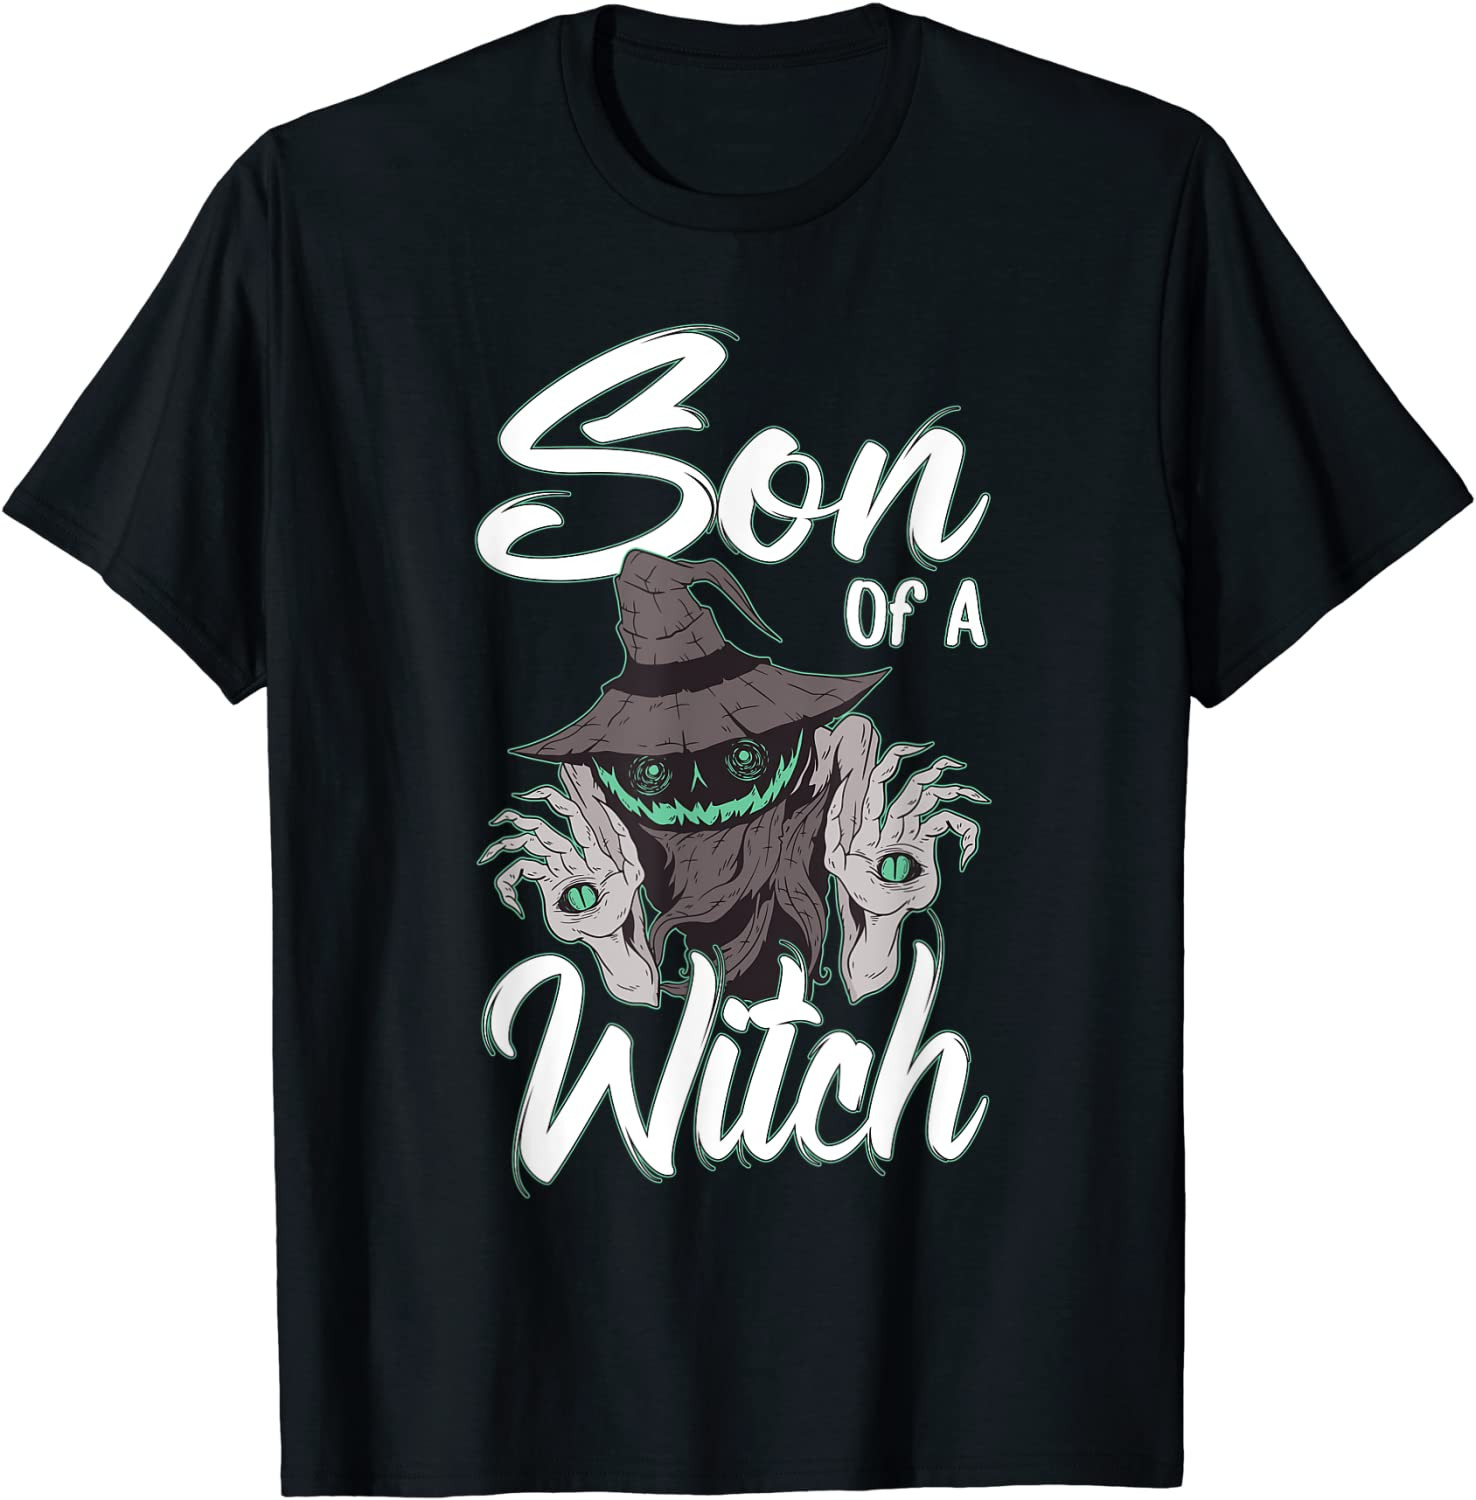 Funny Halloween Costume For A Son With Saying Son Of A Witch T-Shirt